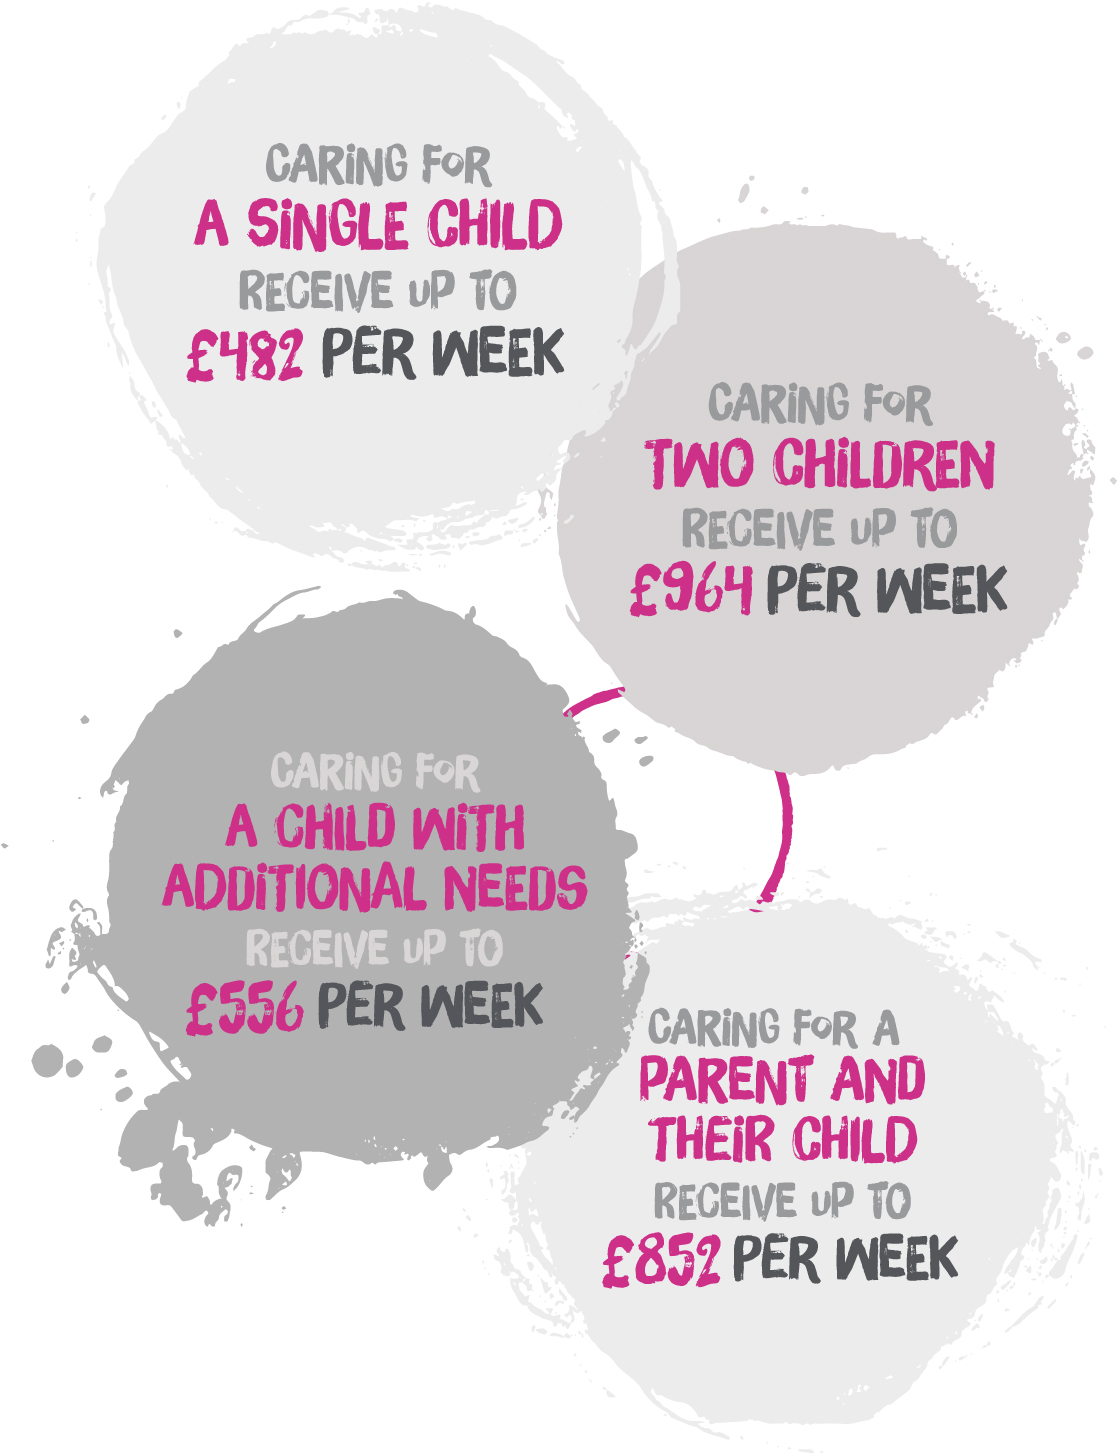 These are our fees if you're thinking of fostering in Walsall